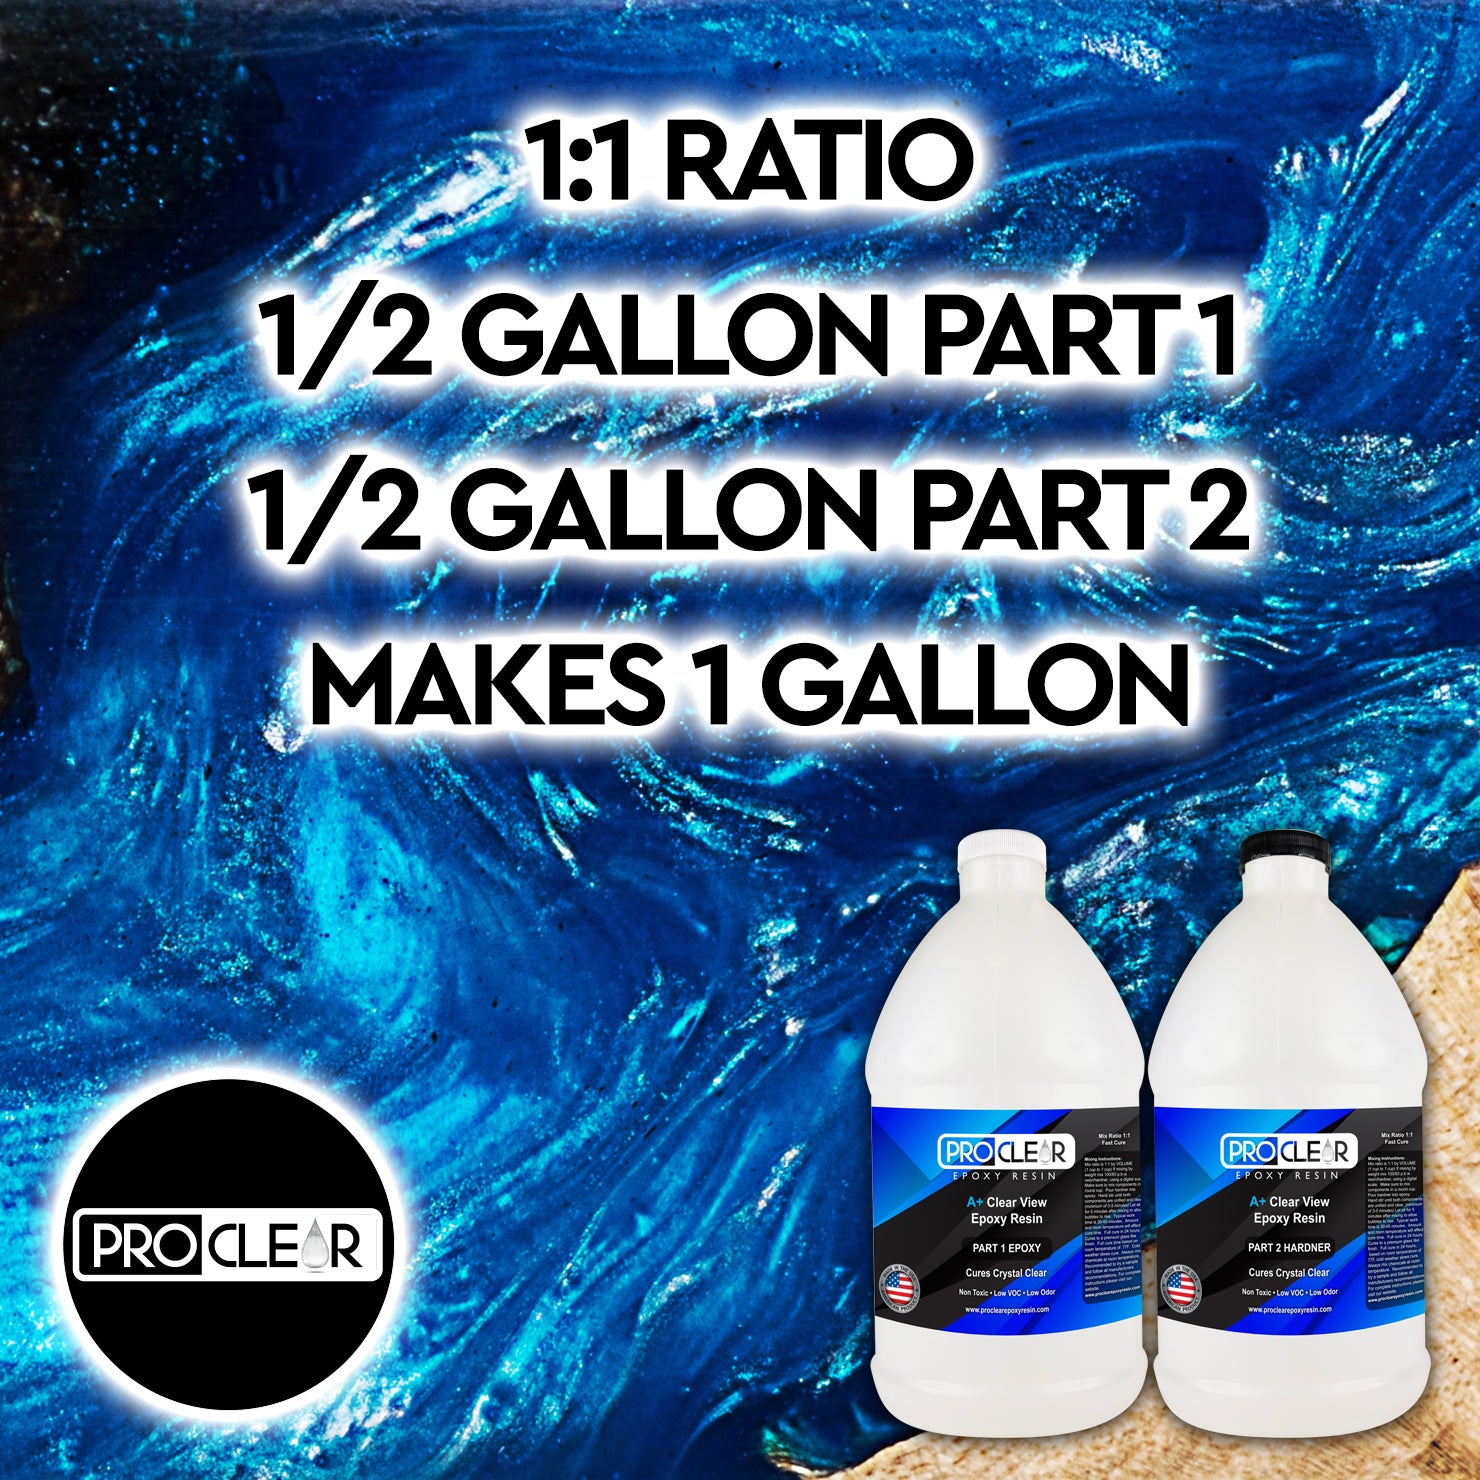 A+ Clear View Epoxy Resin 1 Gallon Kit by Proclear Epoxy Resin (PCALL1GALLON)